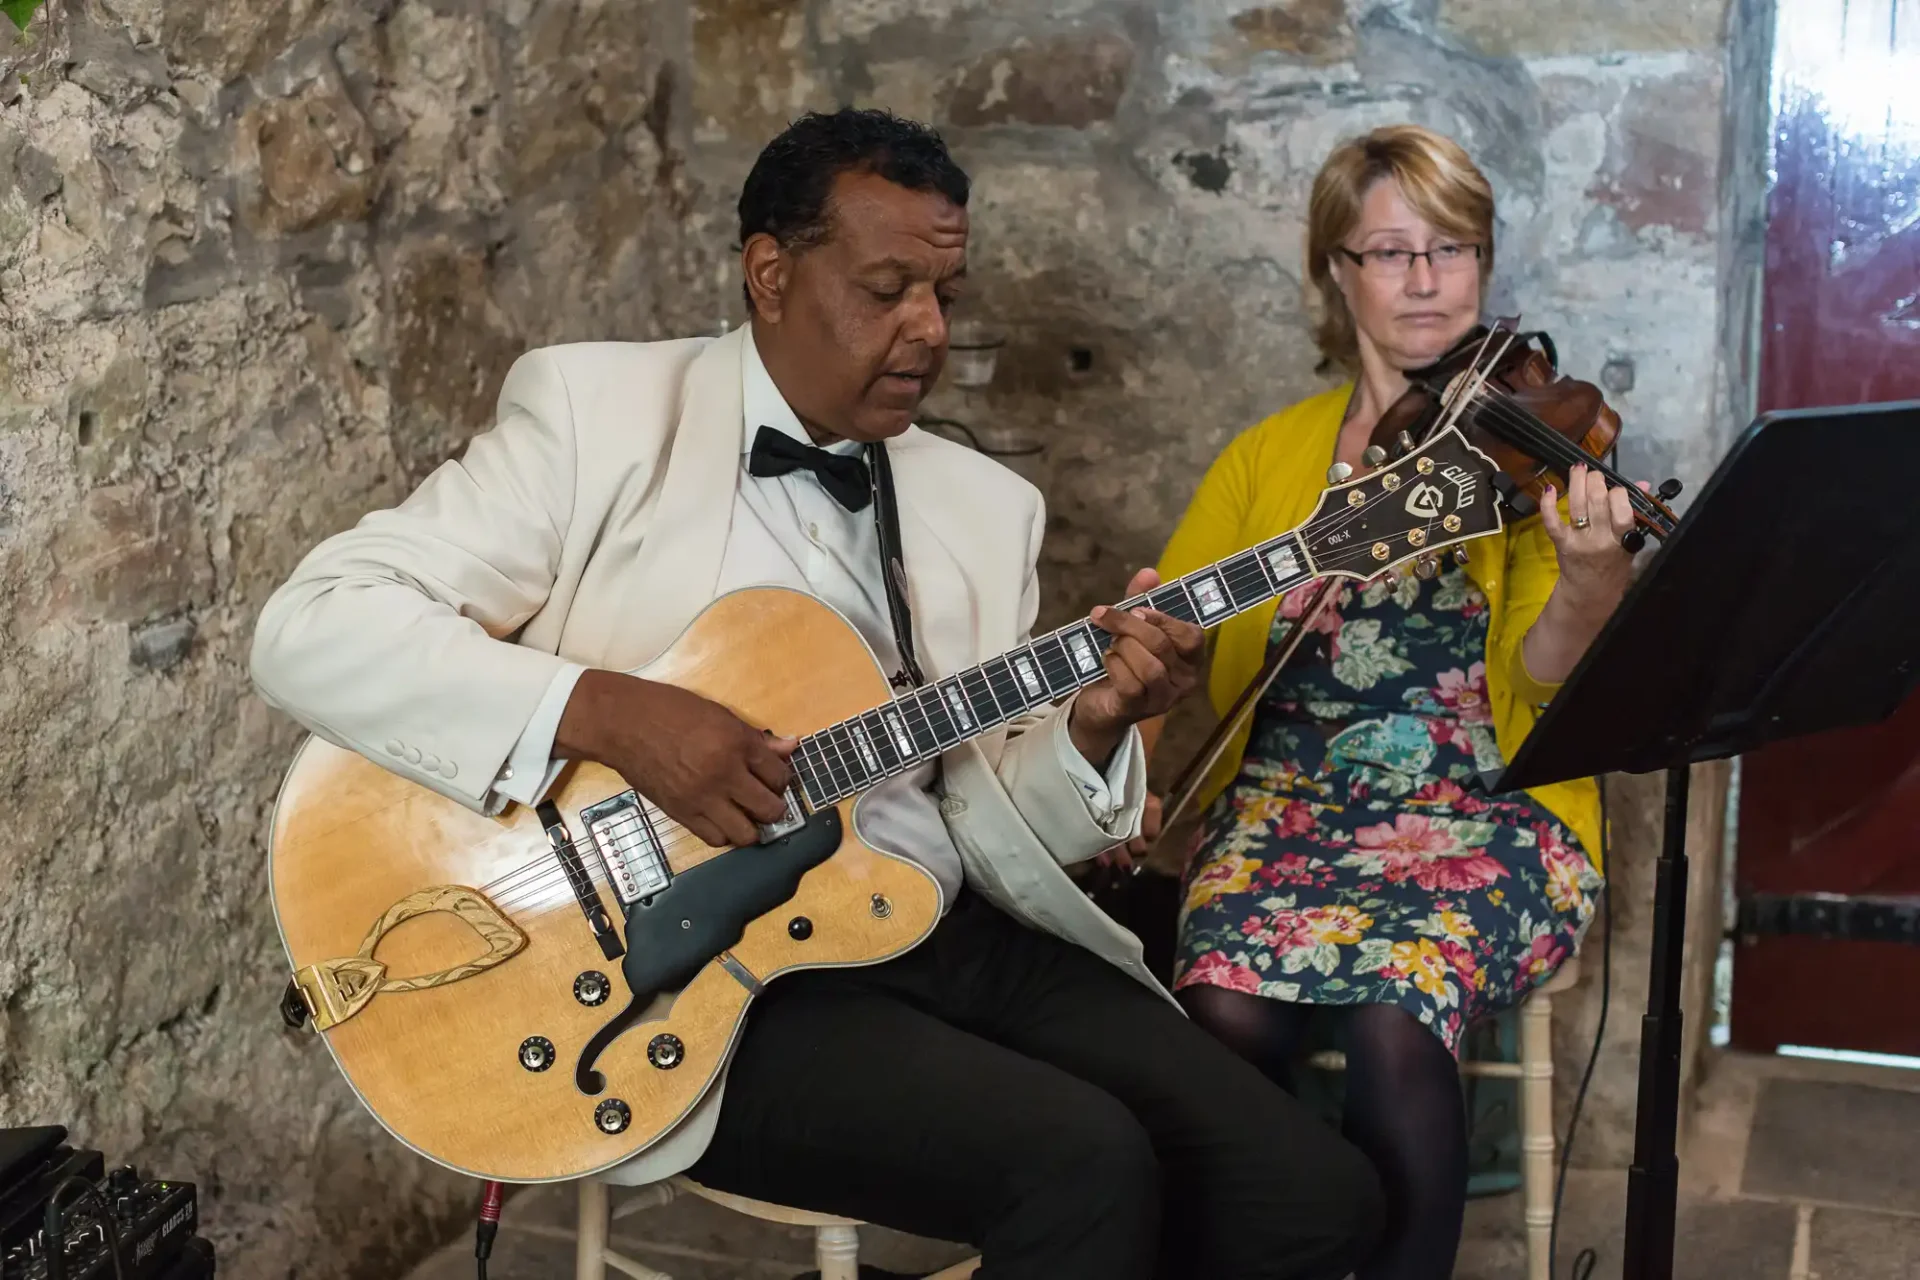 A man in a white suit plays an electric guitar while a woman in a floral dress plays a violin in a rustic setting.